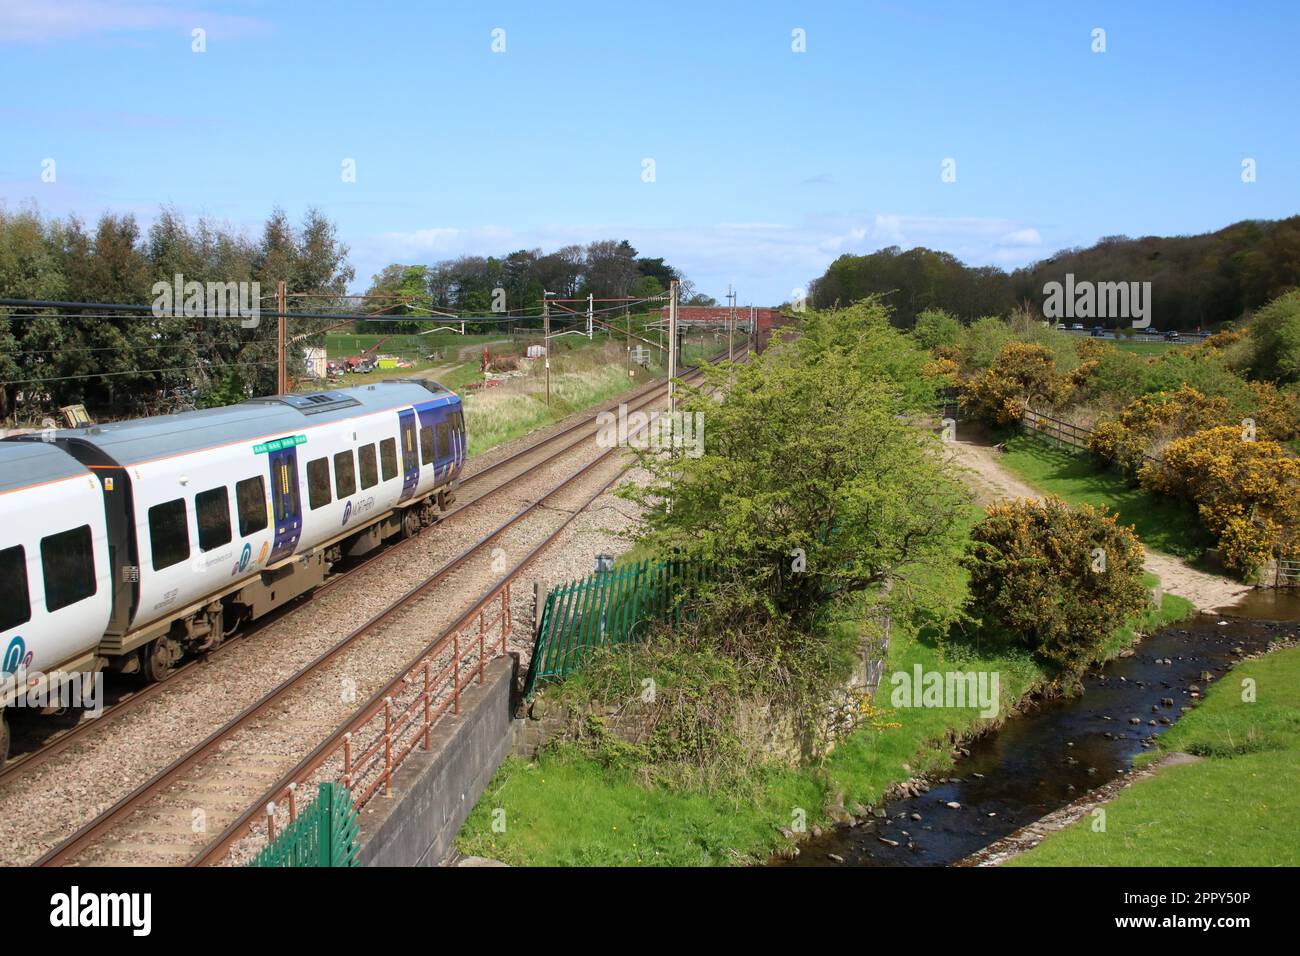 Northern Trains Civity class 195 dmu 195123 on West Coast Main Line in countryside at Woodacre near Garstang in Lancashire on 25th April 2023. Stock Photo